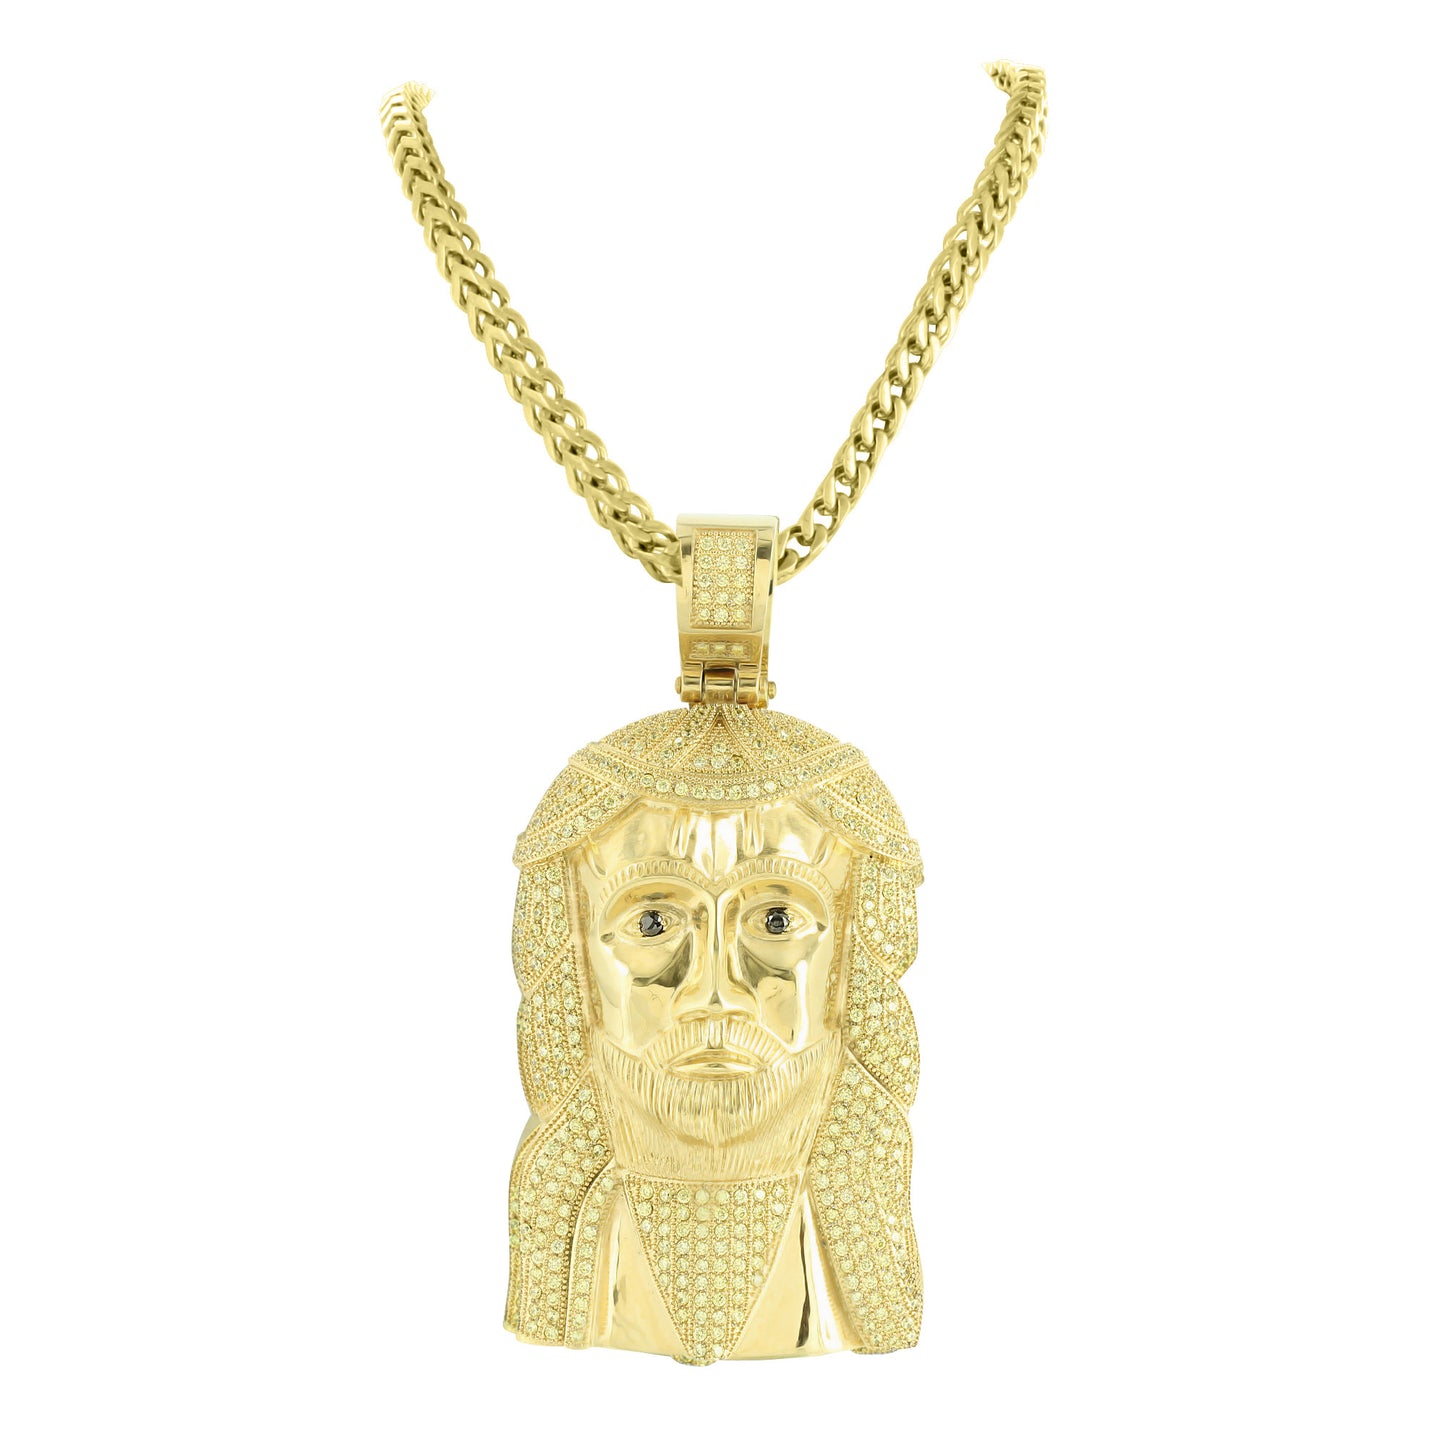 Stainless Steel Jesus Pendant Yellow Gold Finish With Chain